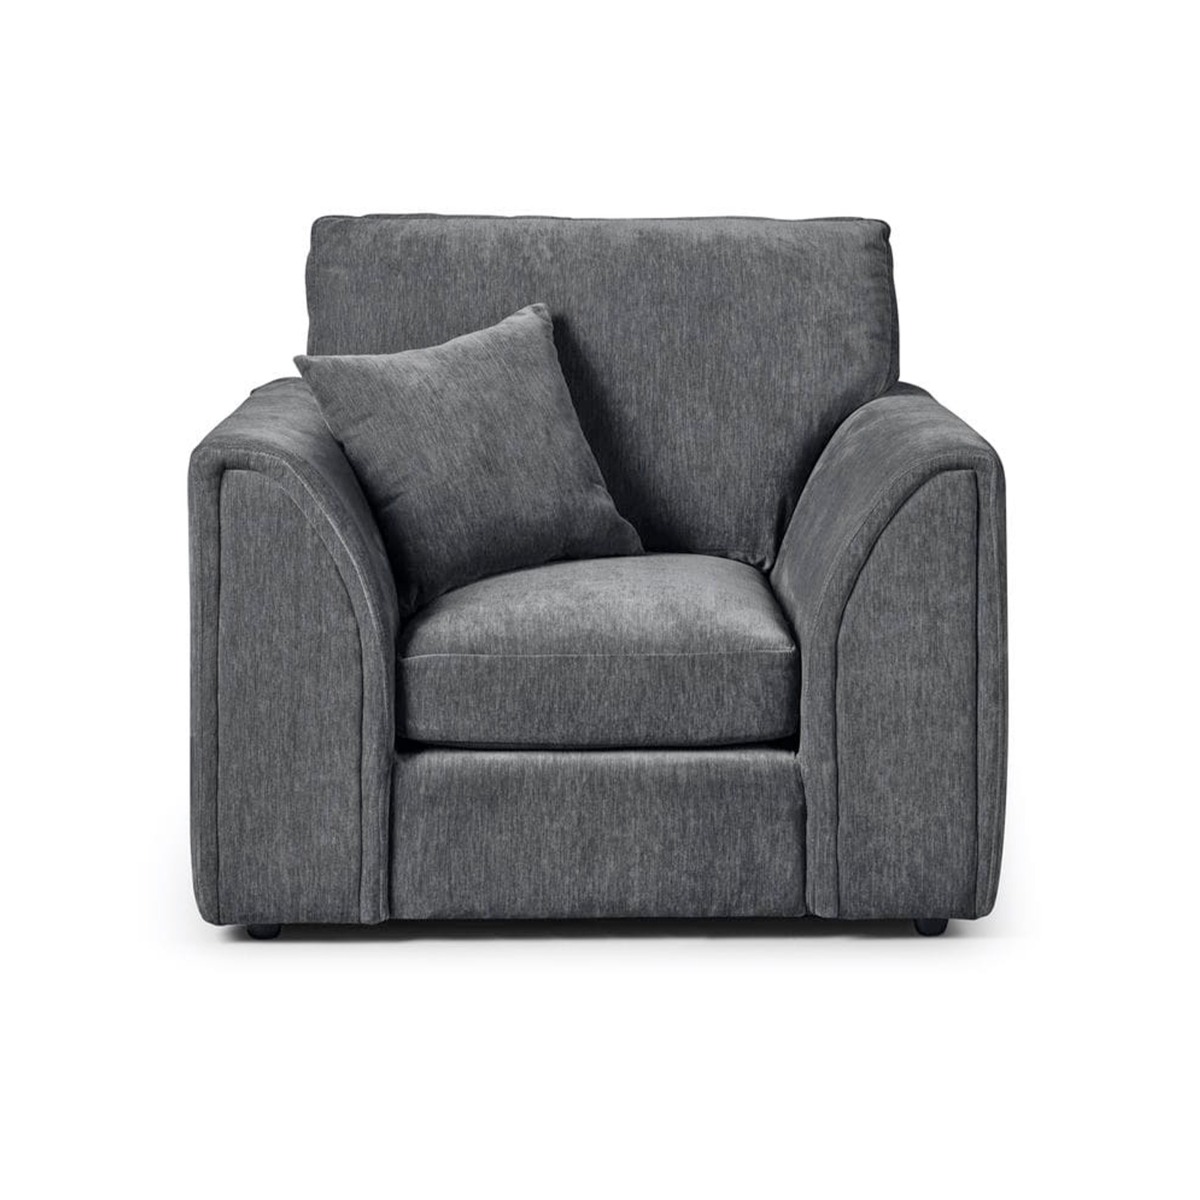 Barnaby Fabric Arm Chair in Charcoal